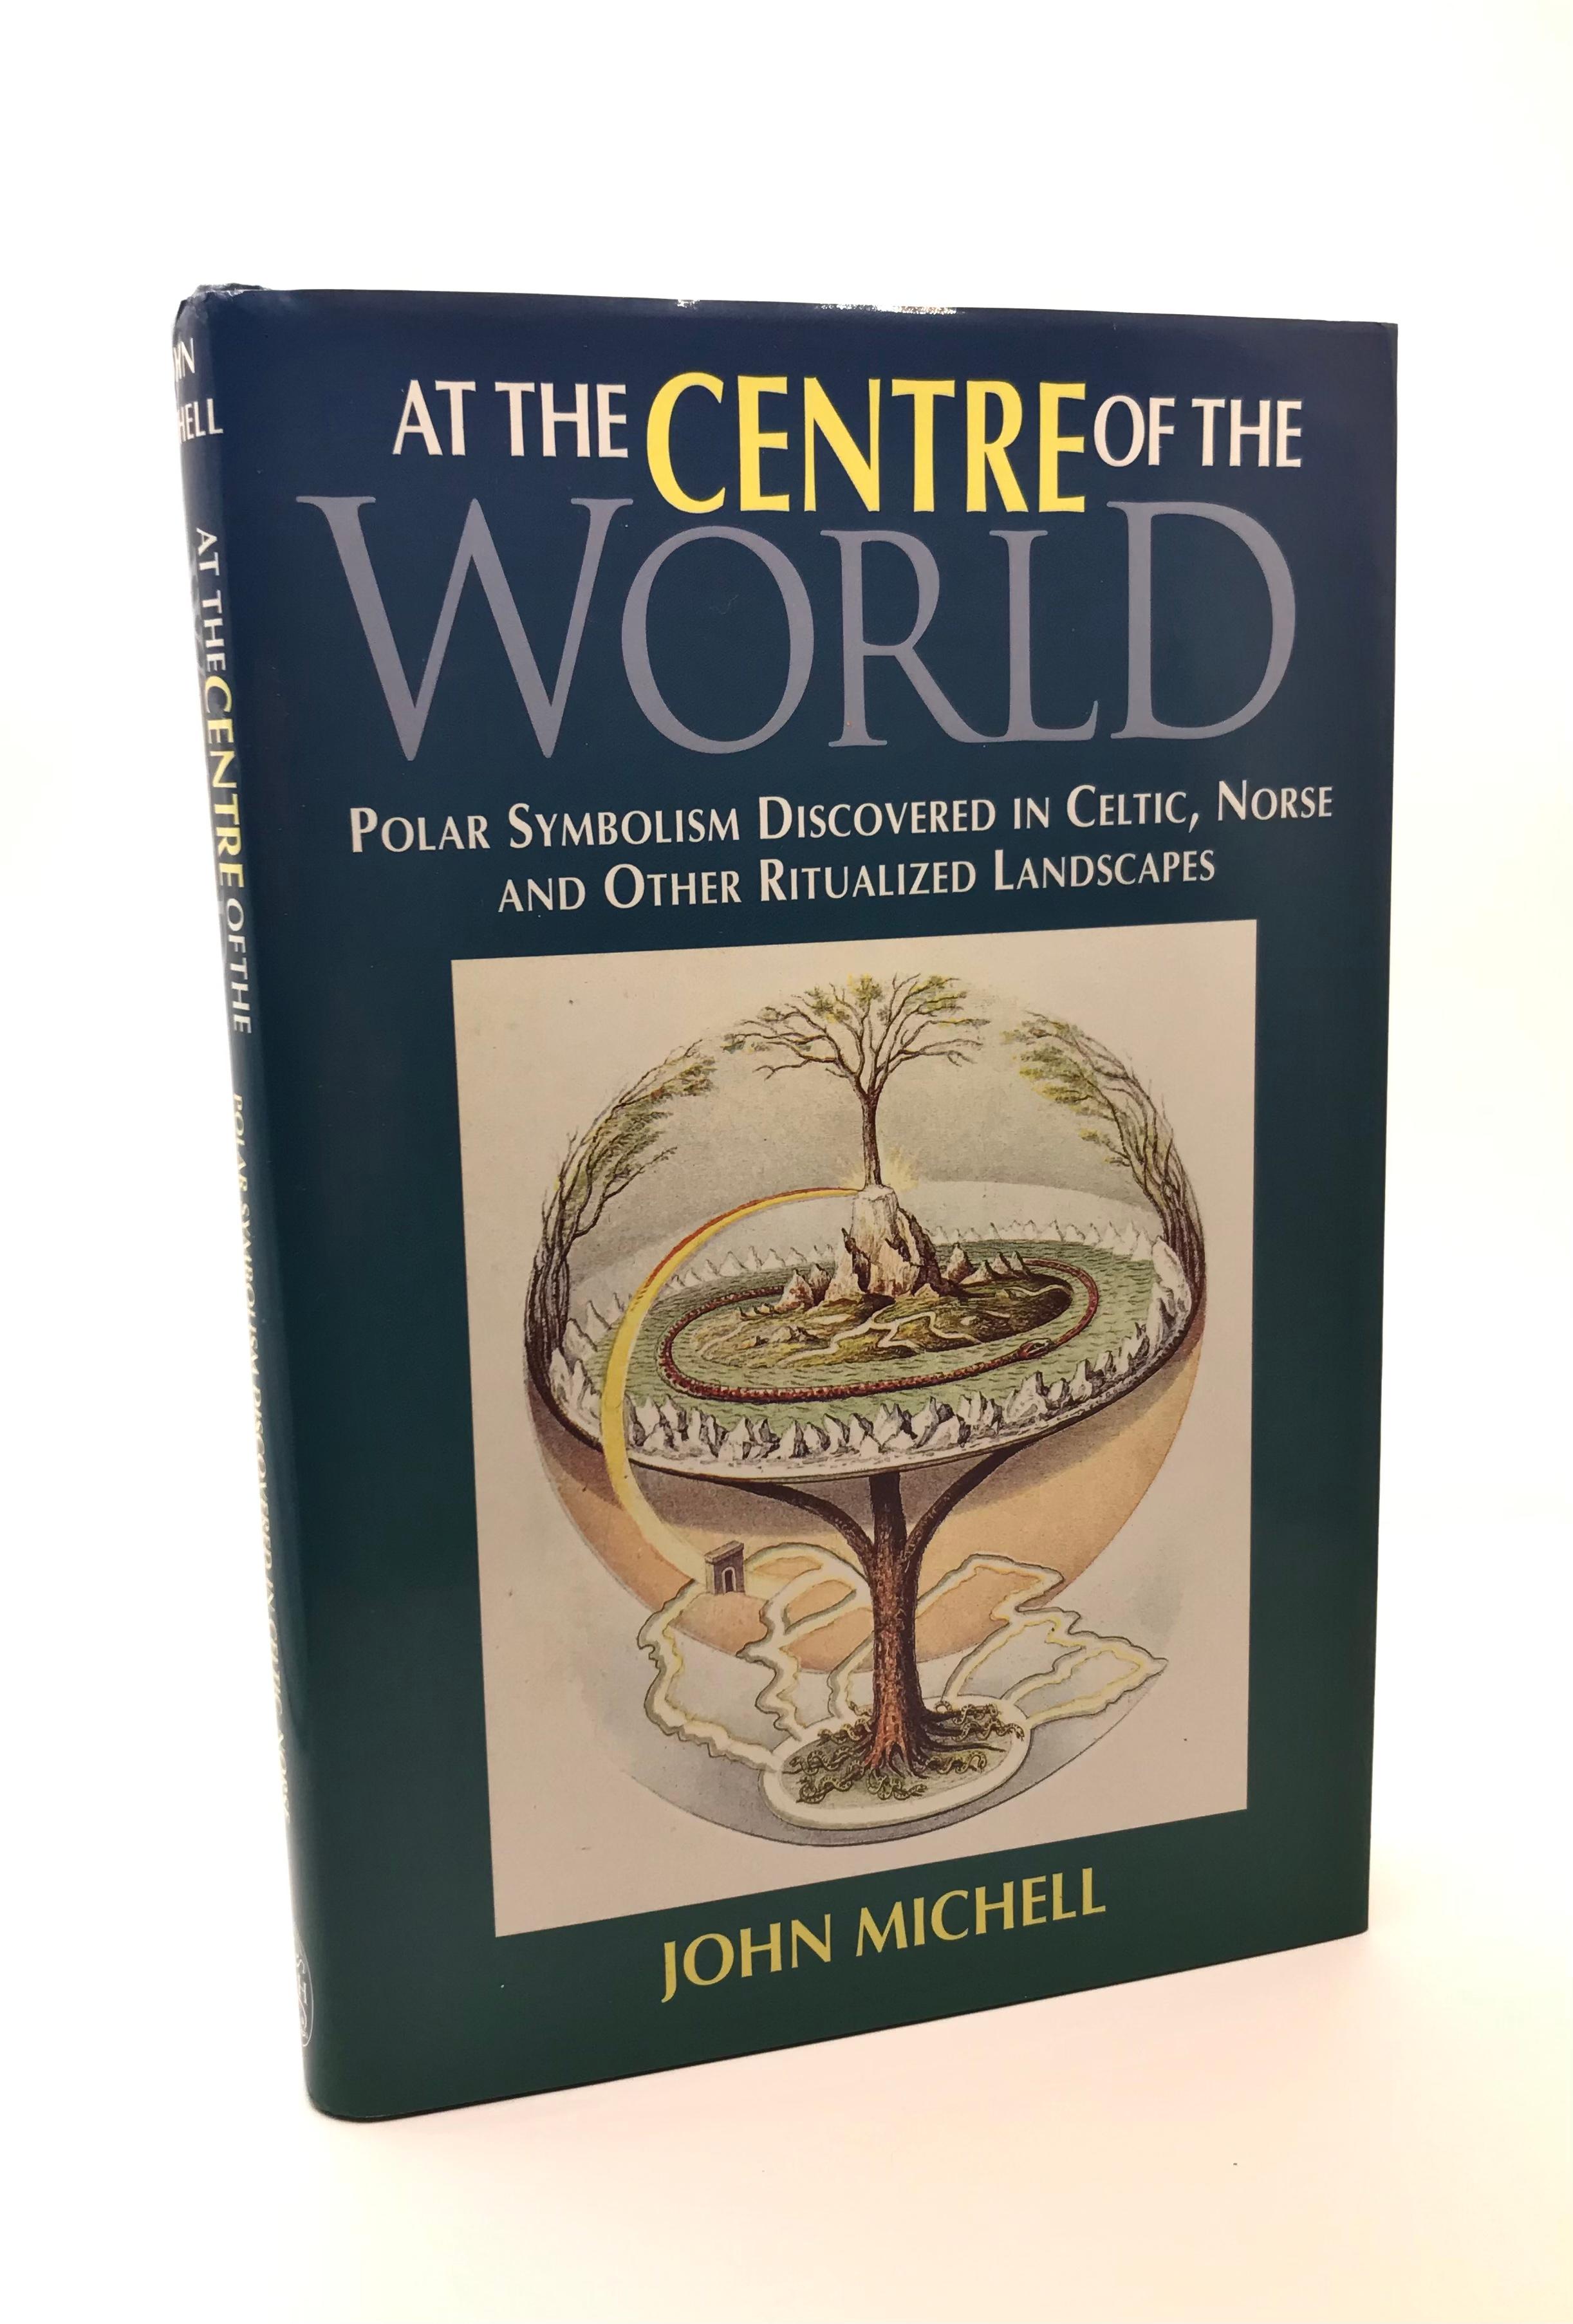 At the Centre of the World by John Mitchell